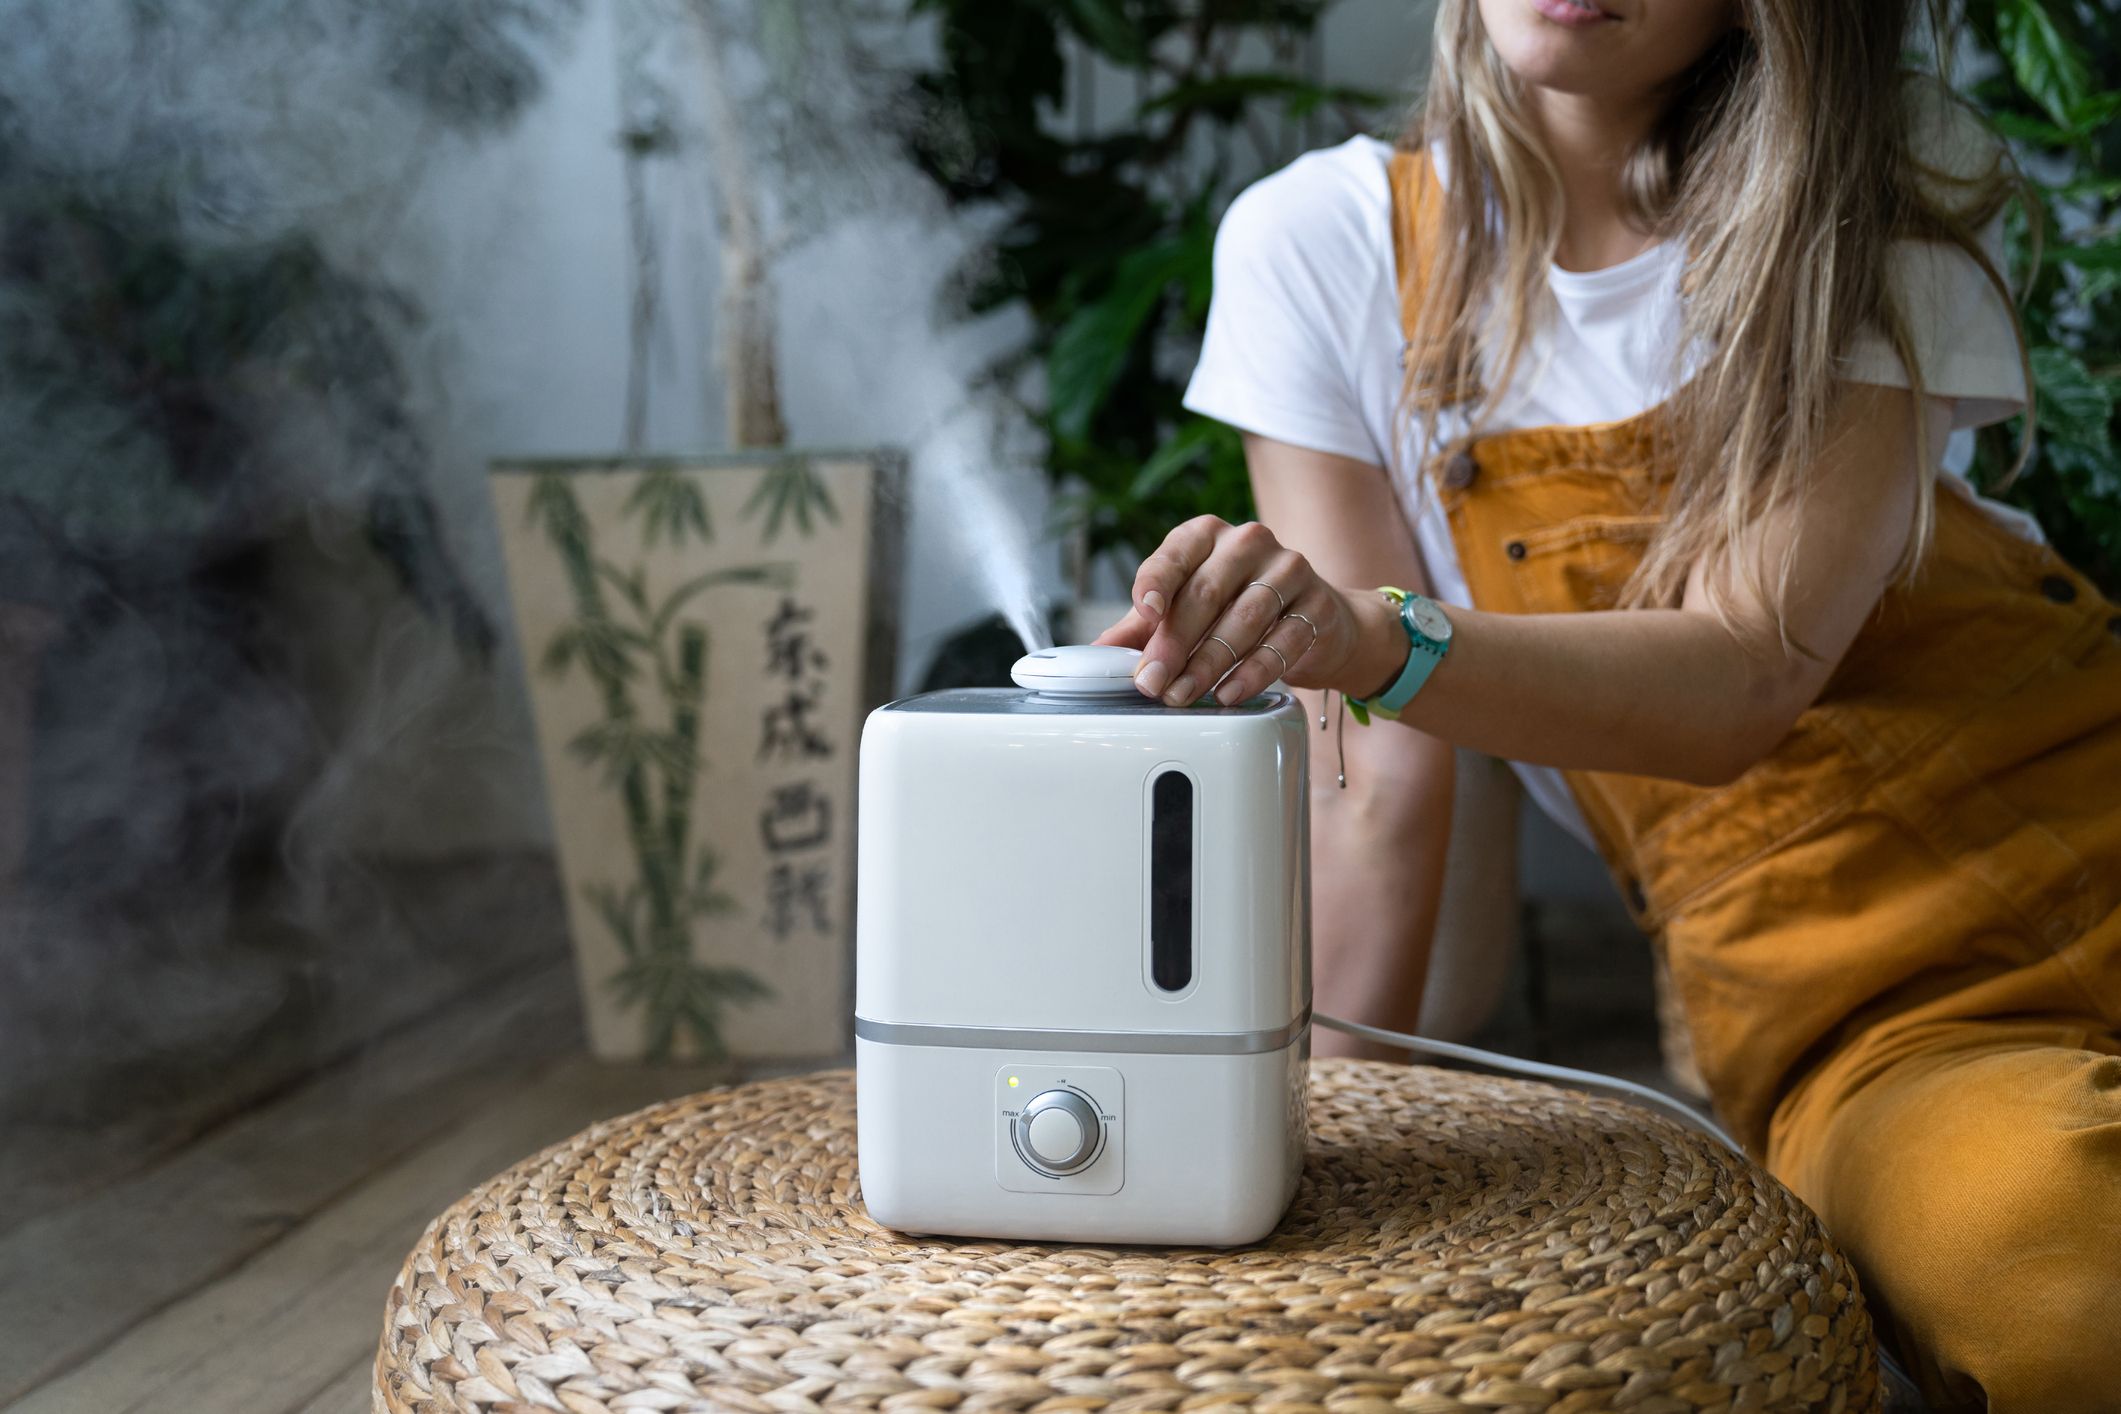 https://hips.hearstapps.com/hmg-prod/images/how-to-clean-humidifier-651186dadd348.jpg